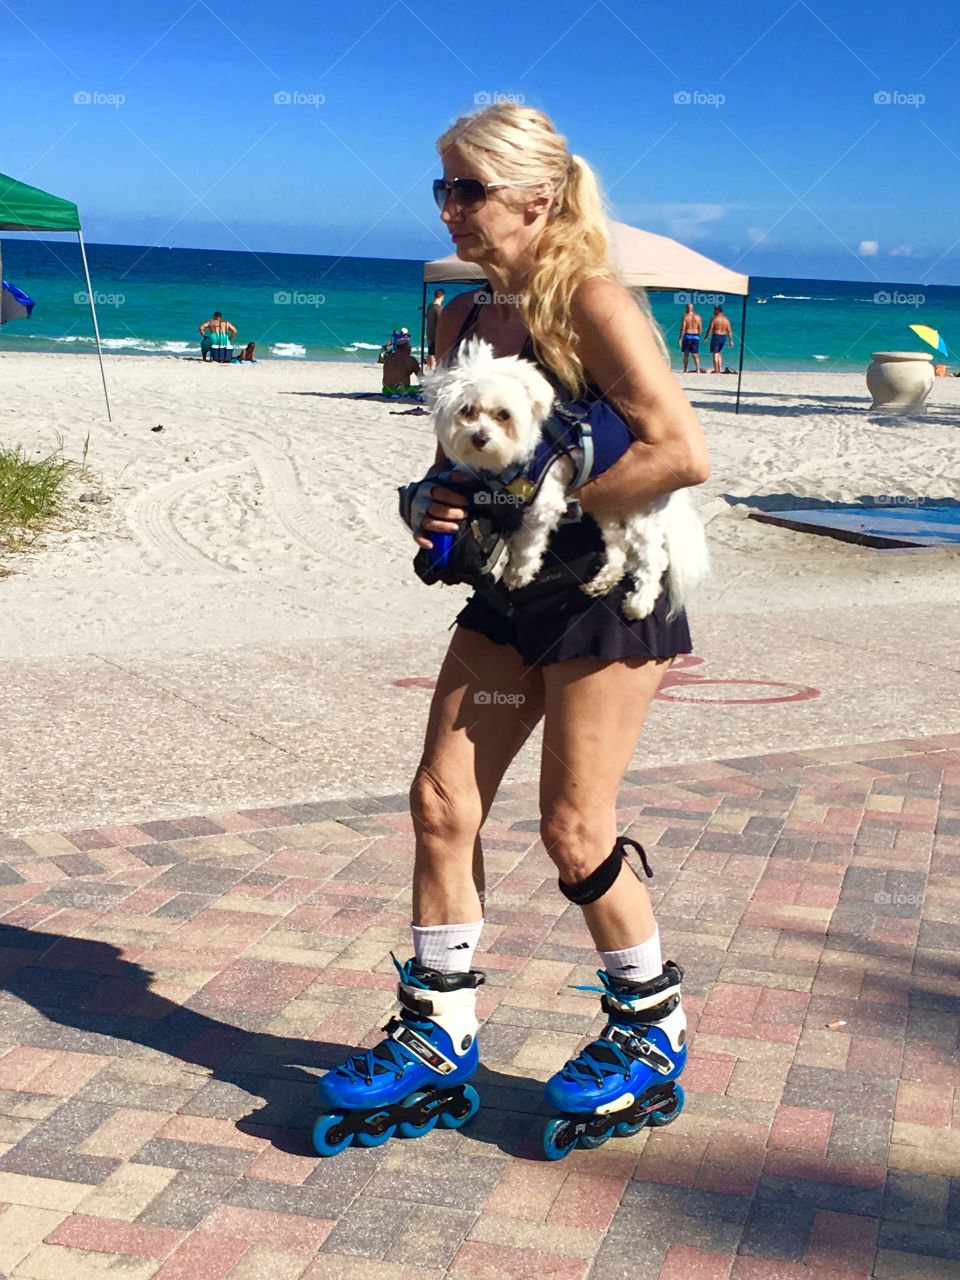 Rollerblading with a dog